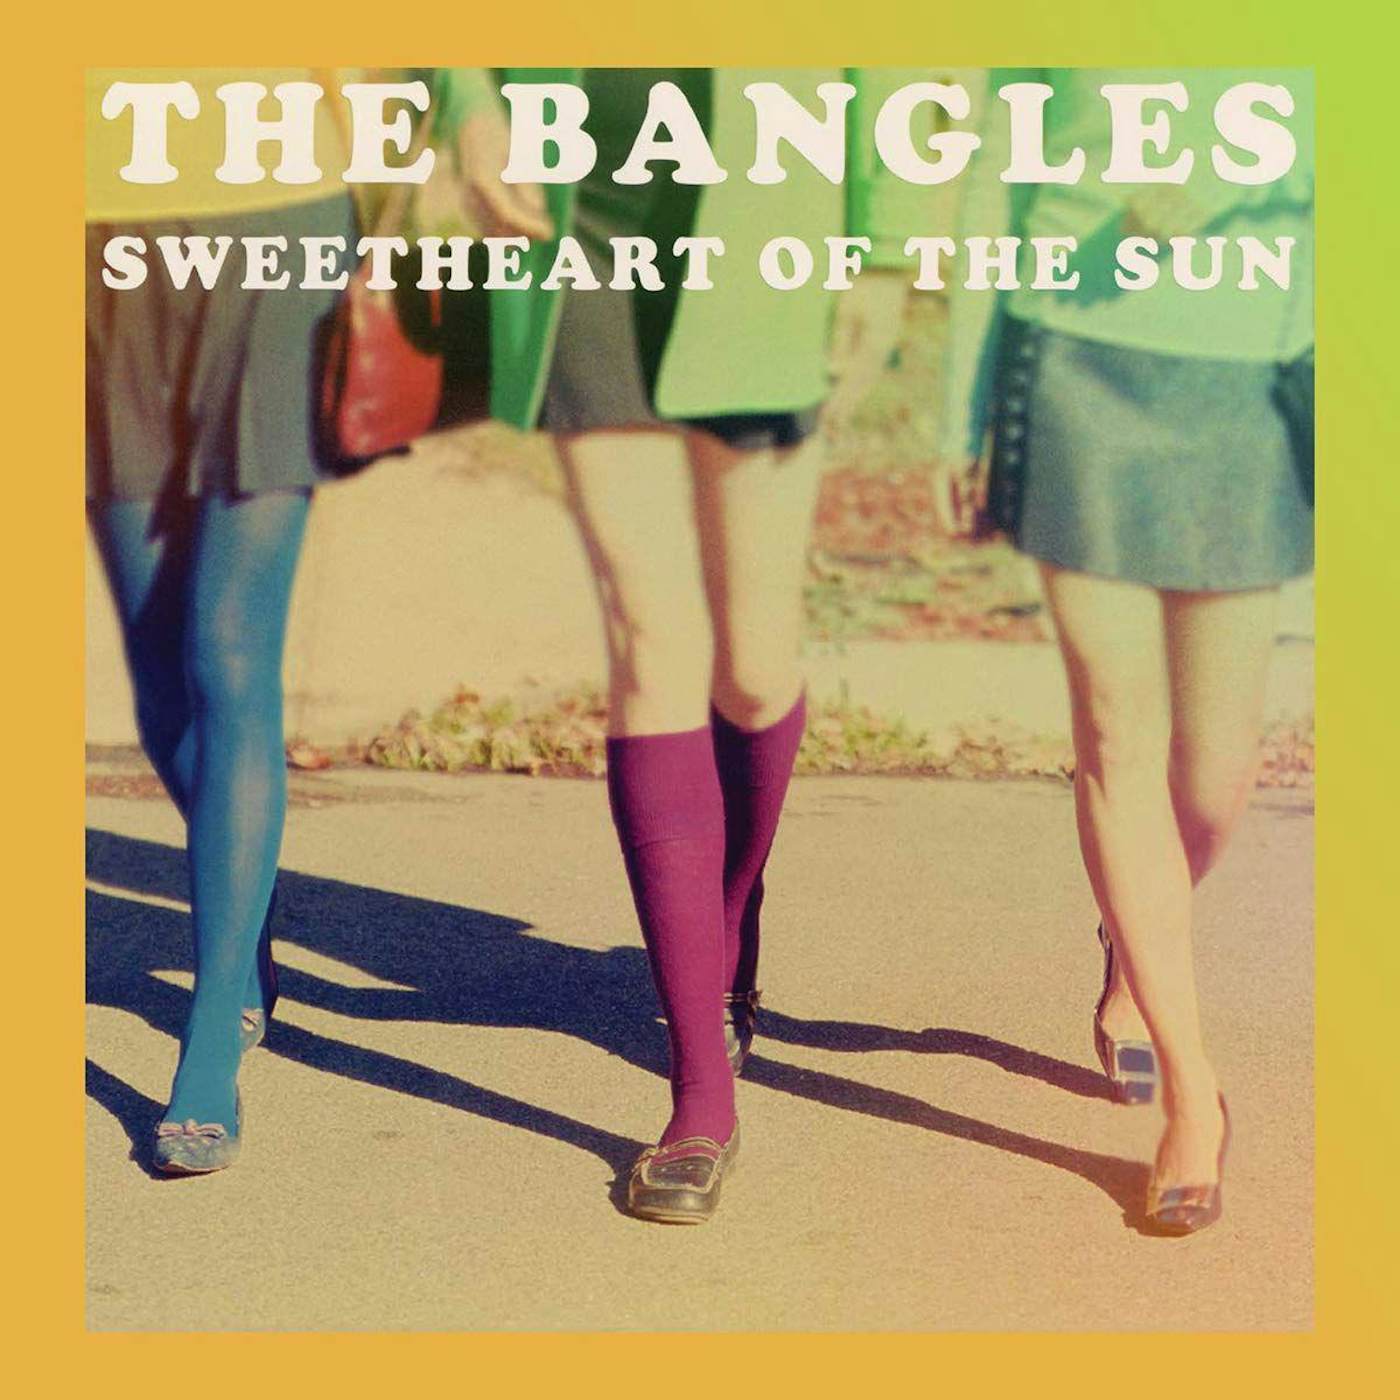 The Bangles Sweetheart Of The Sun (Limited Transparent Teal Vinyl Edition) Vinyl Record